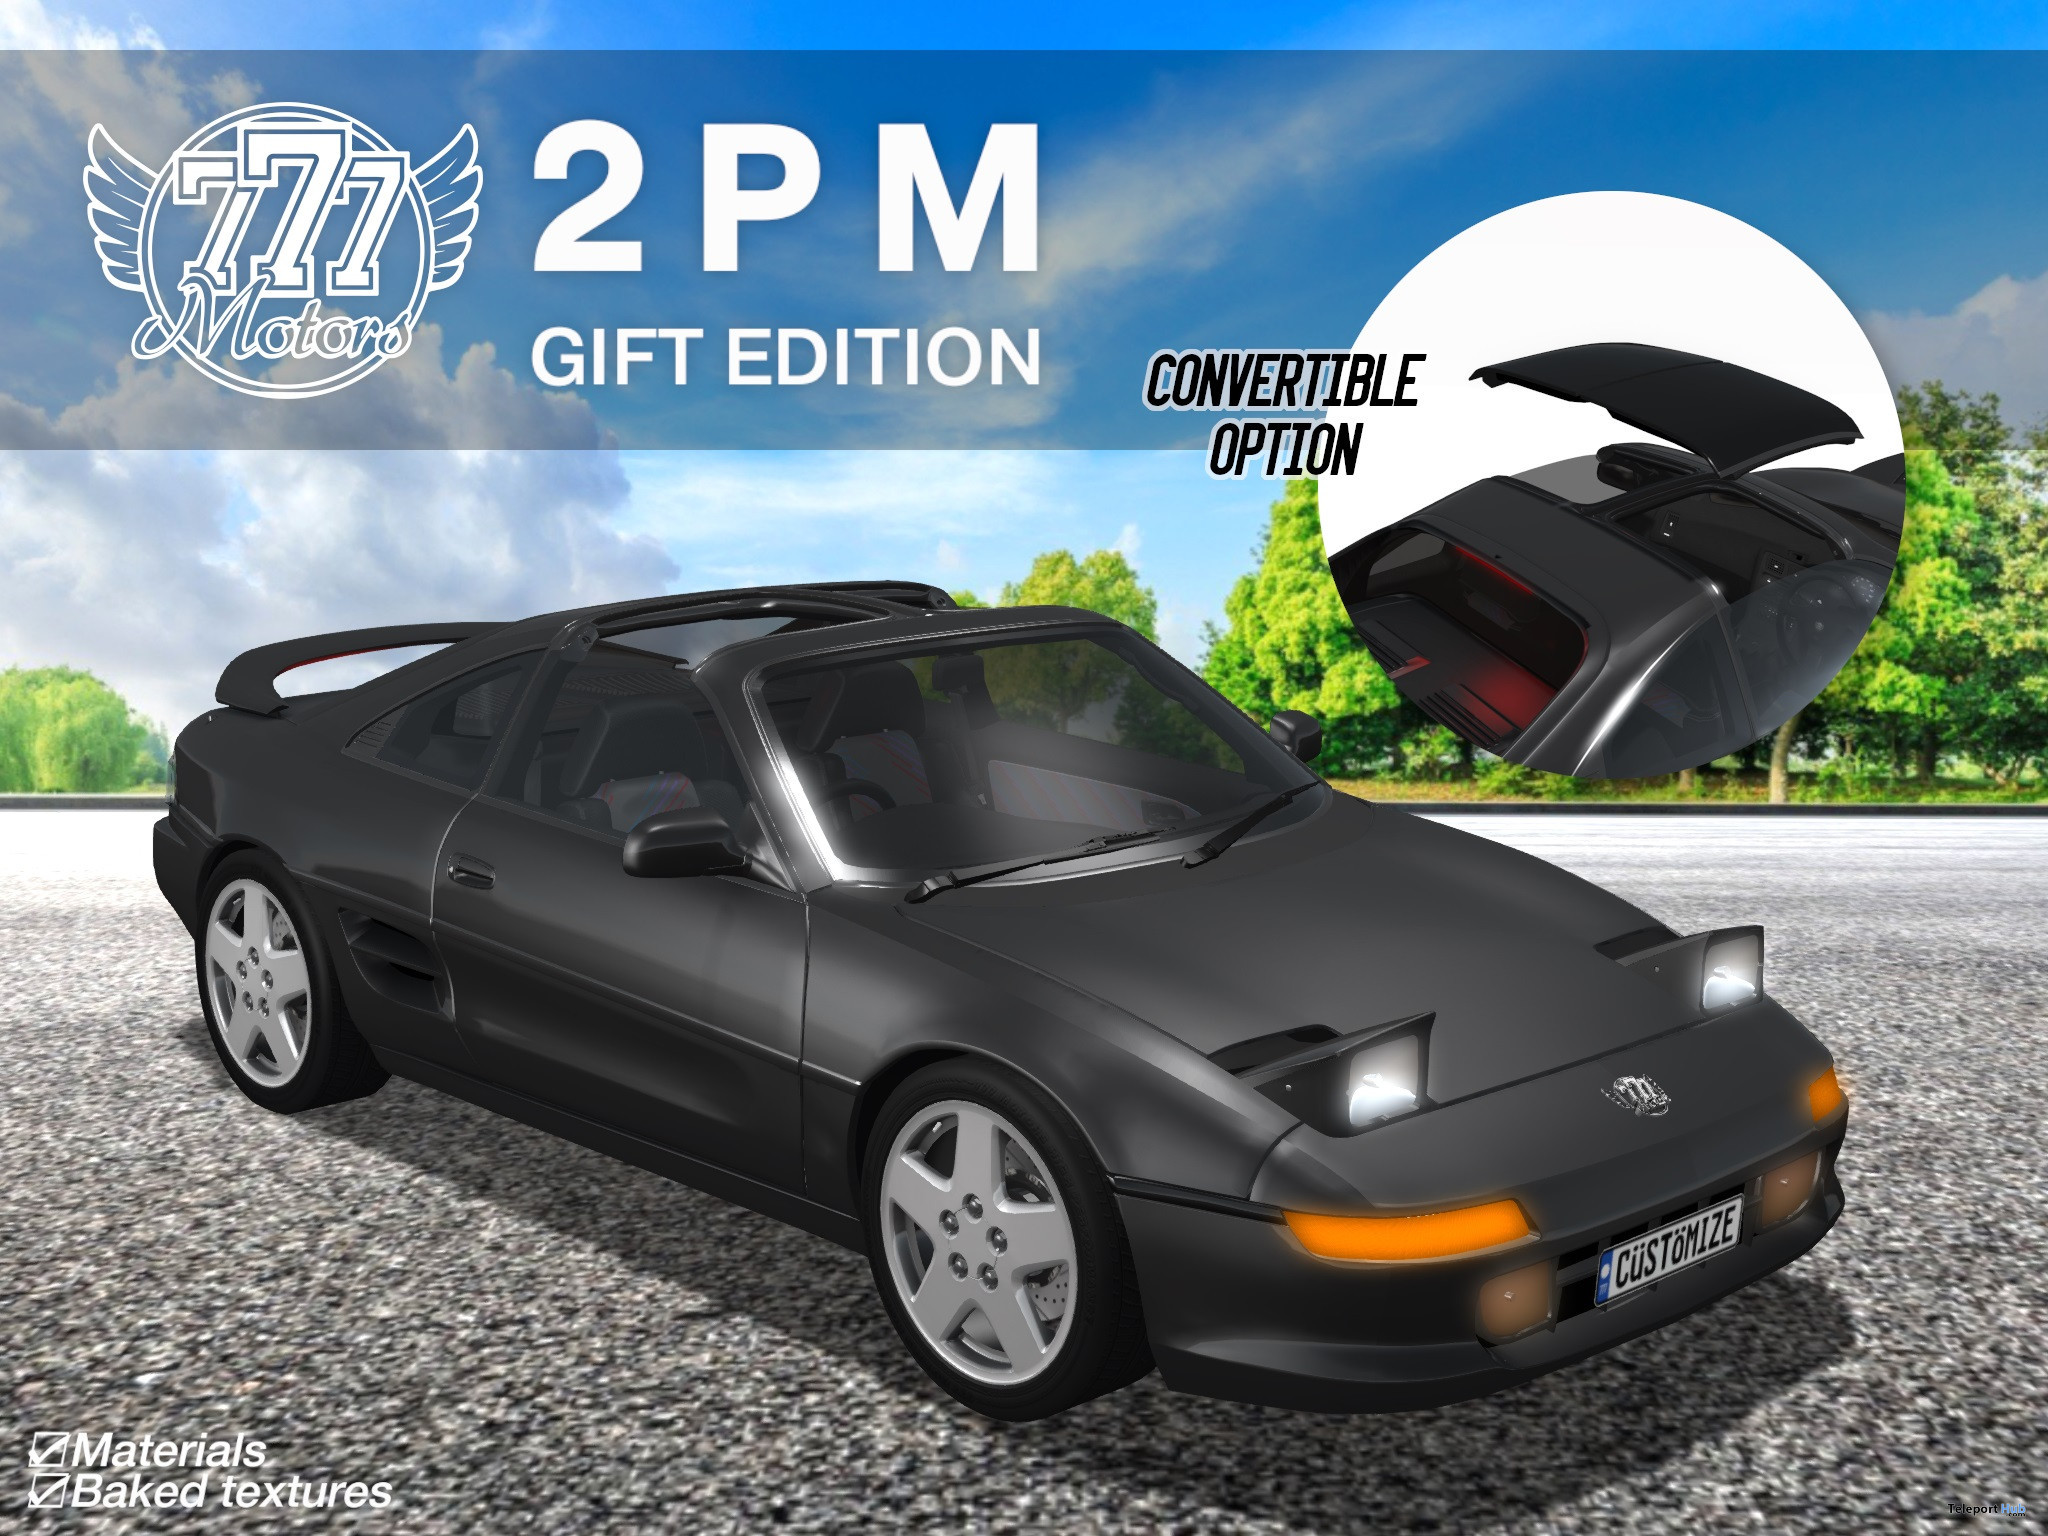 2PM Convertible Car May 2022 Group Gift by 777 Motors - Teleport Hub - teleporthub.com